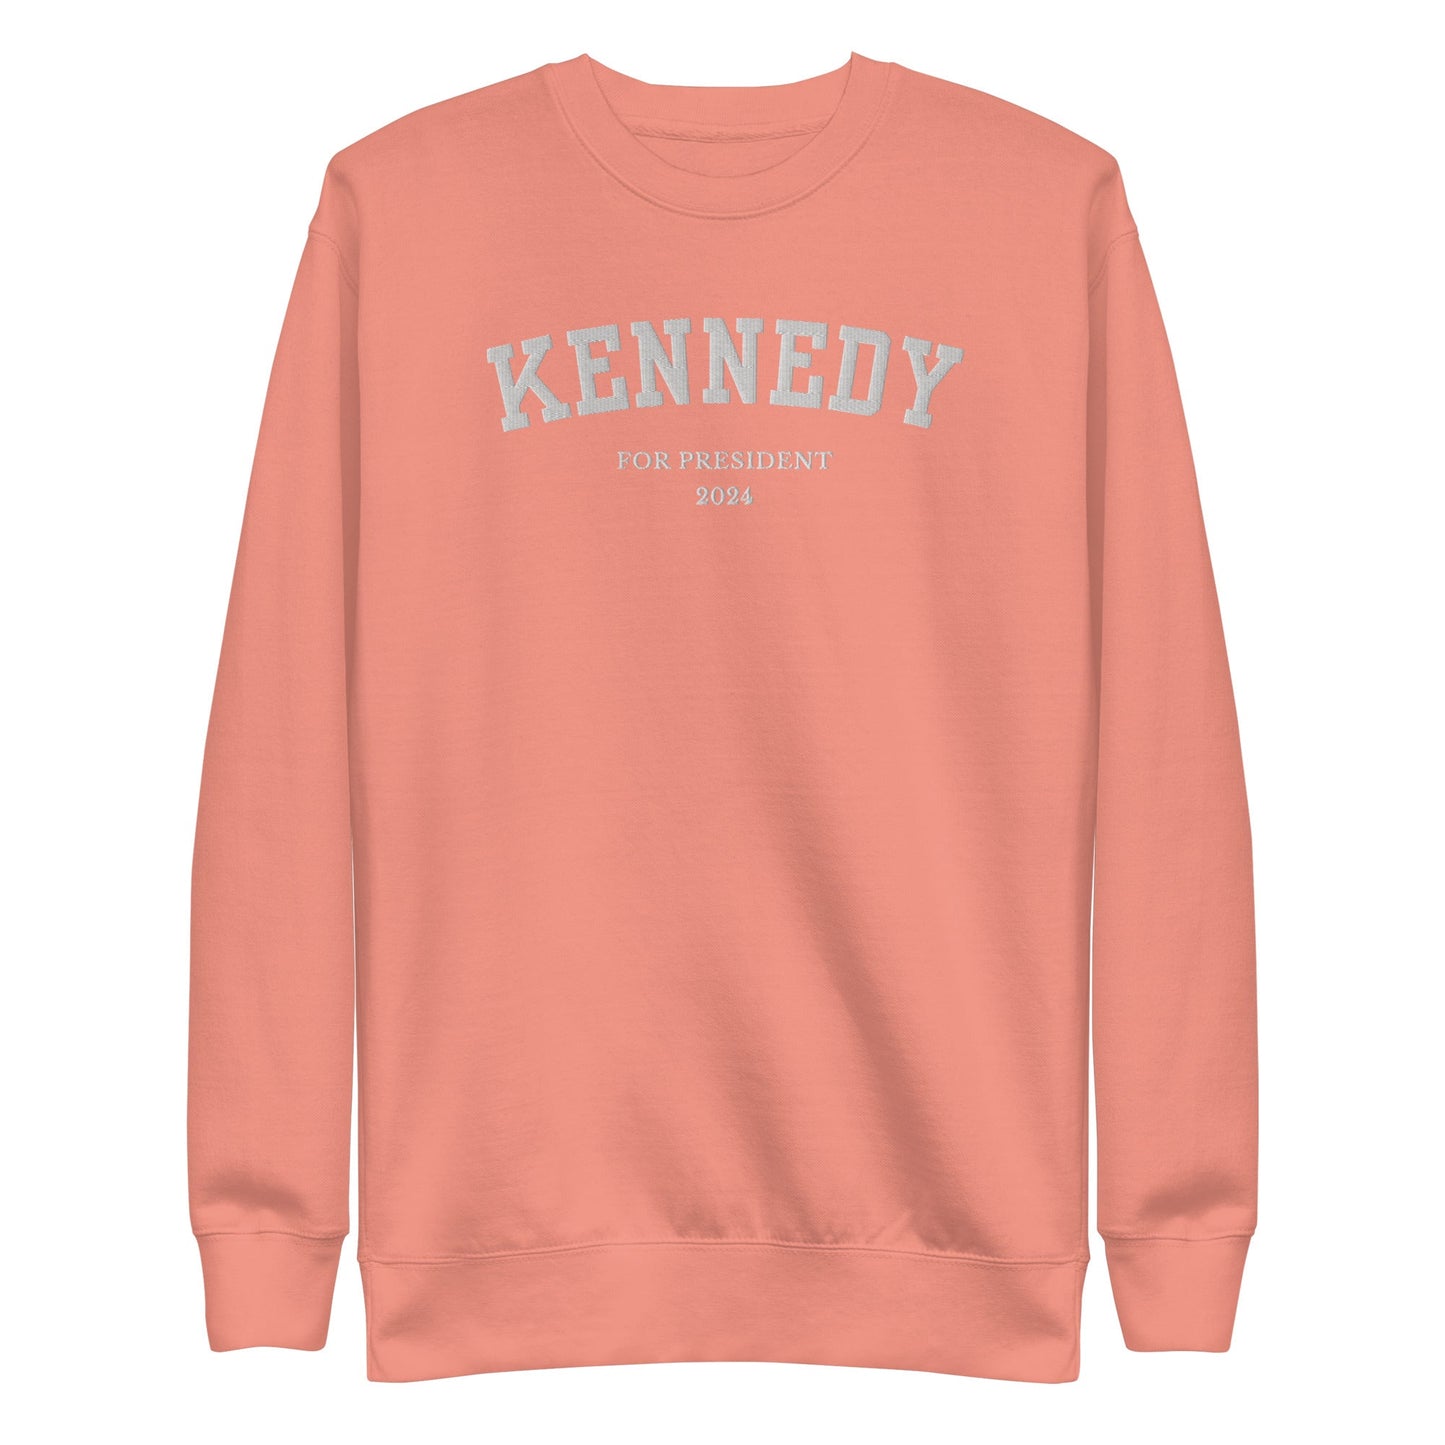 Kennedy for President Embroidered Collegiate Premium Sweatshirt - TEAM KENNEDY. All rights reserved